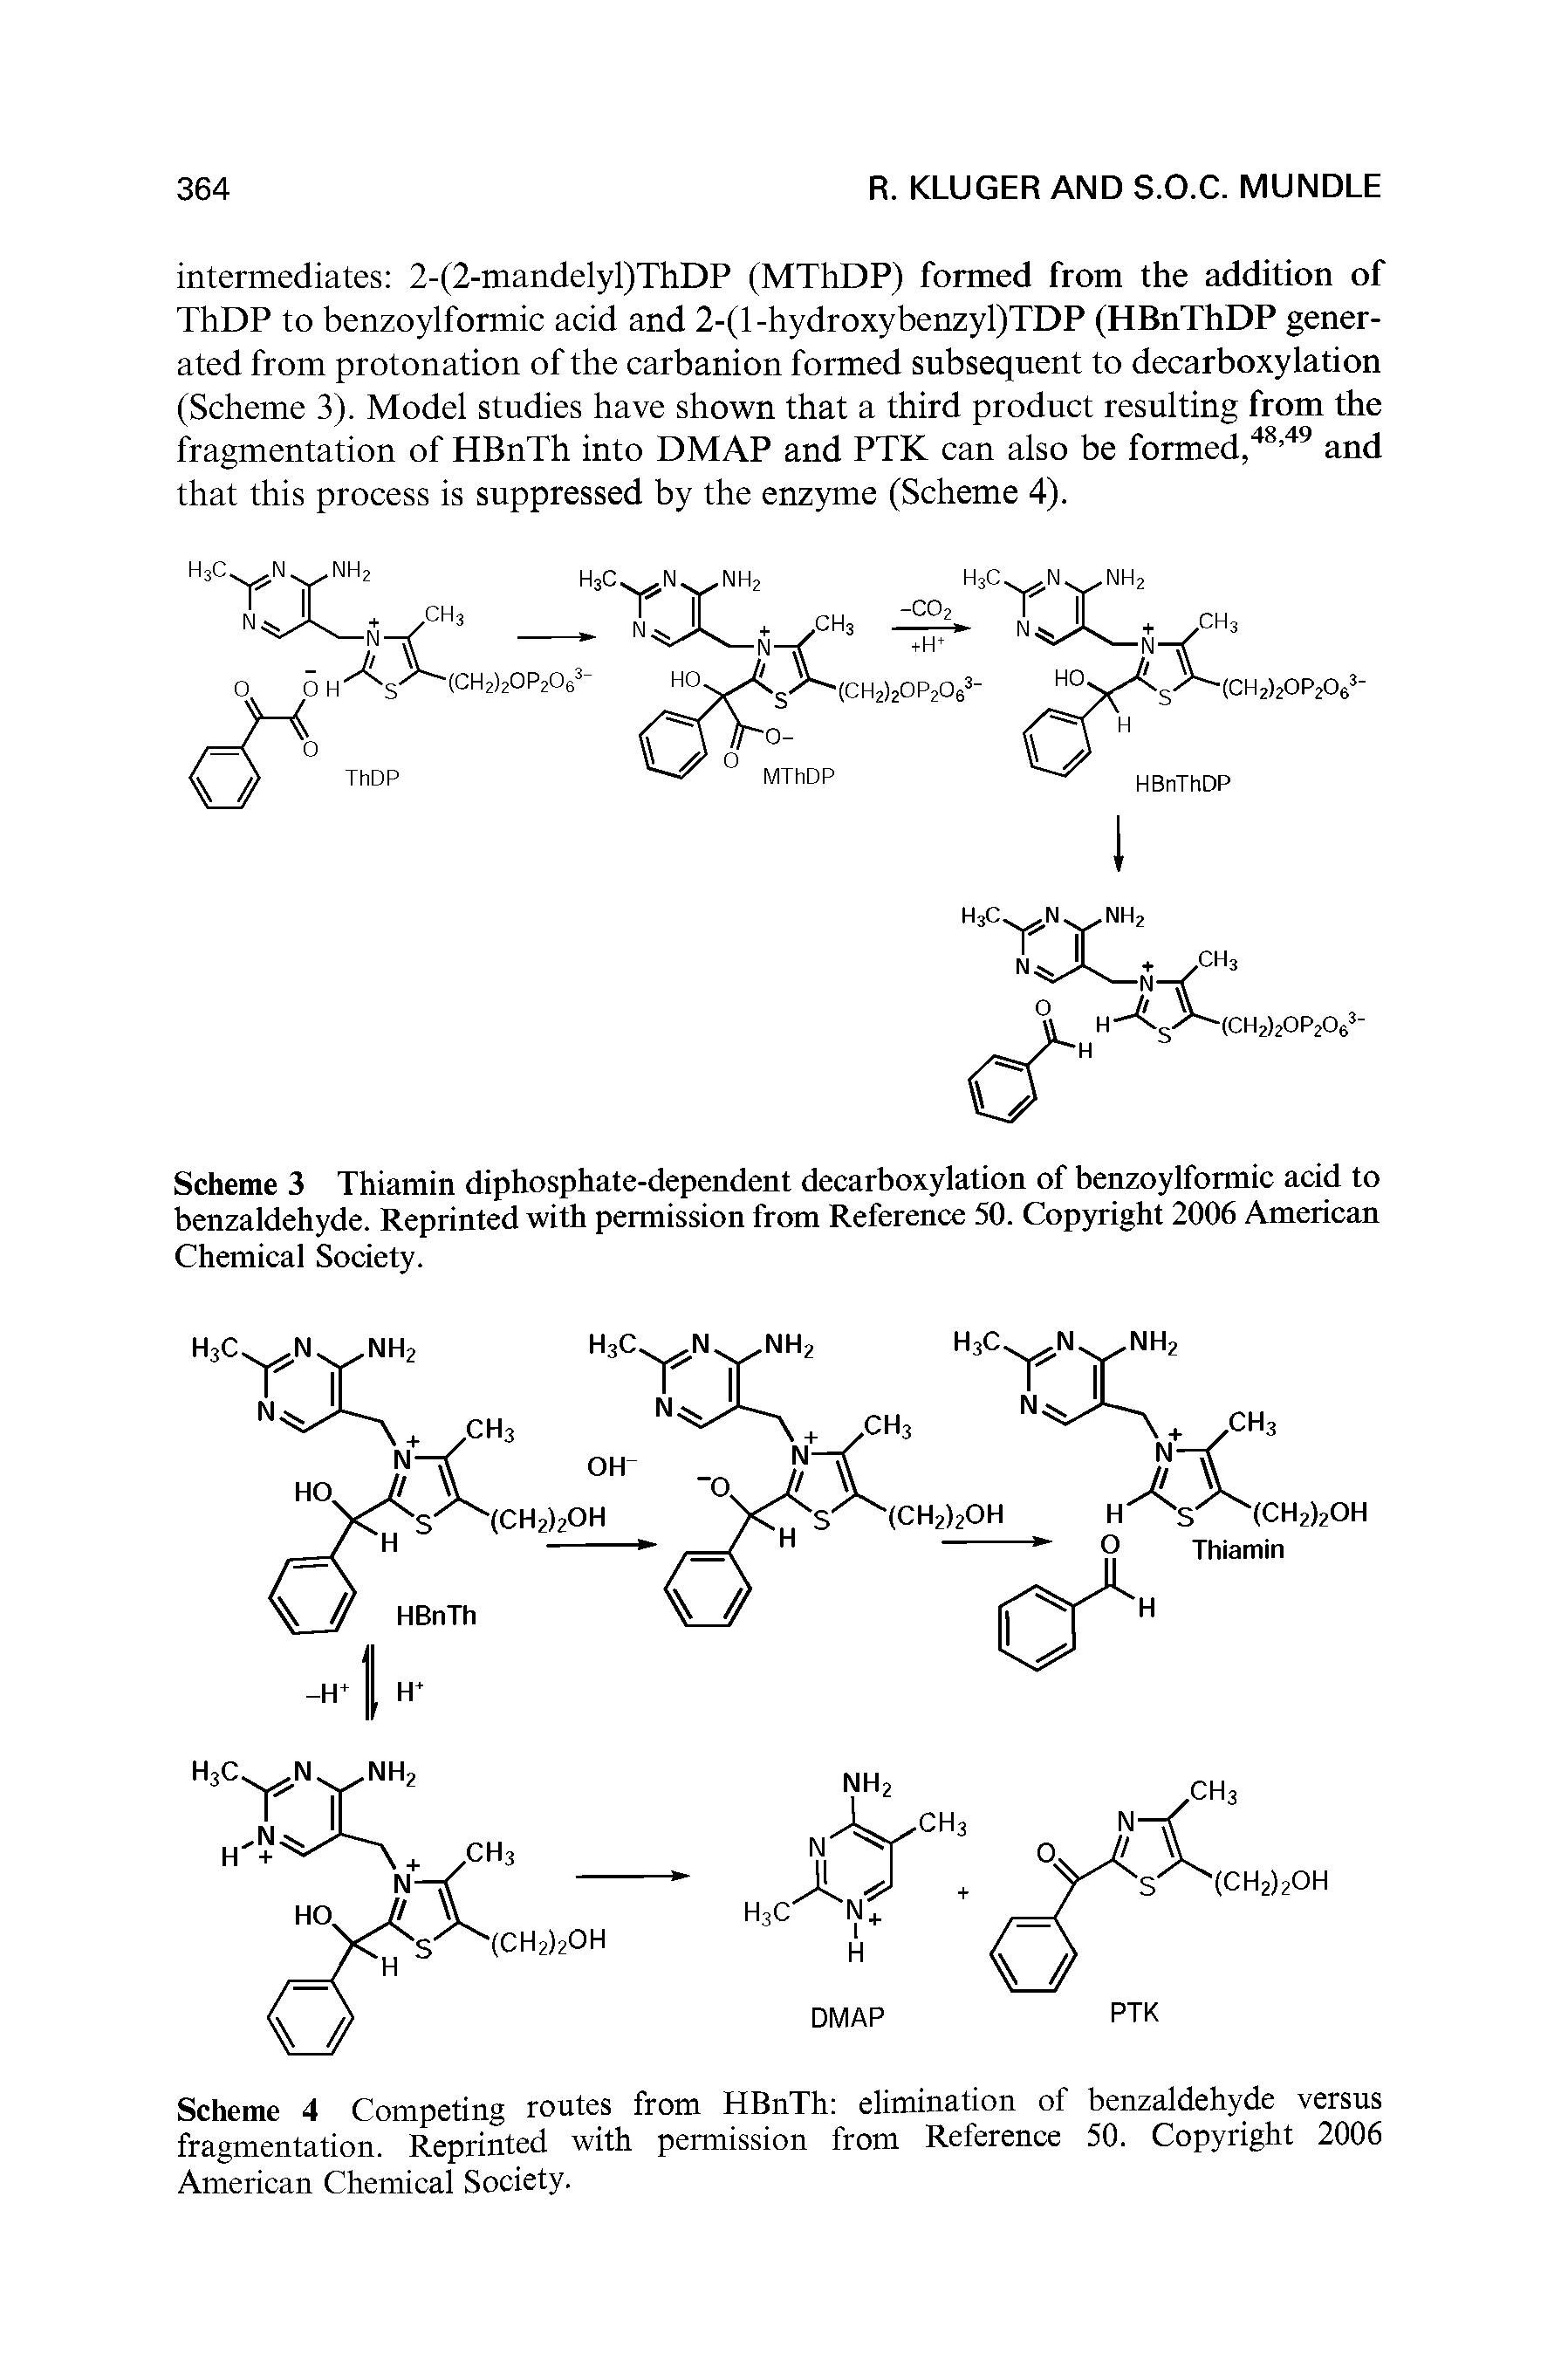 Scheme 3 Thiamin diphosphate-dependent decarboxylation of benzoylfonnic acid to benzaldehyde. Reprinted with permission from Reference 50. Copyright 2006 American Chemical Society.